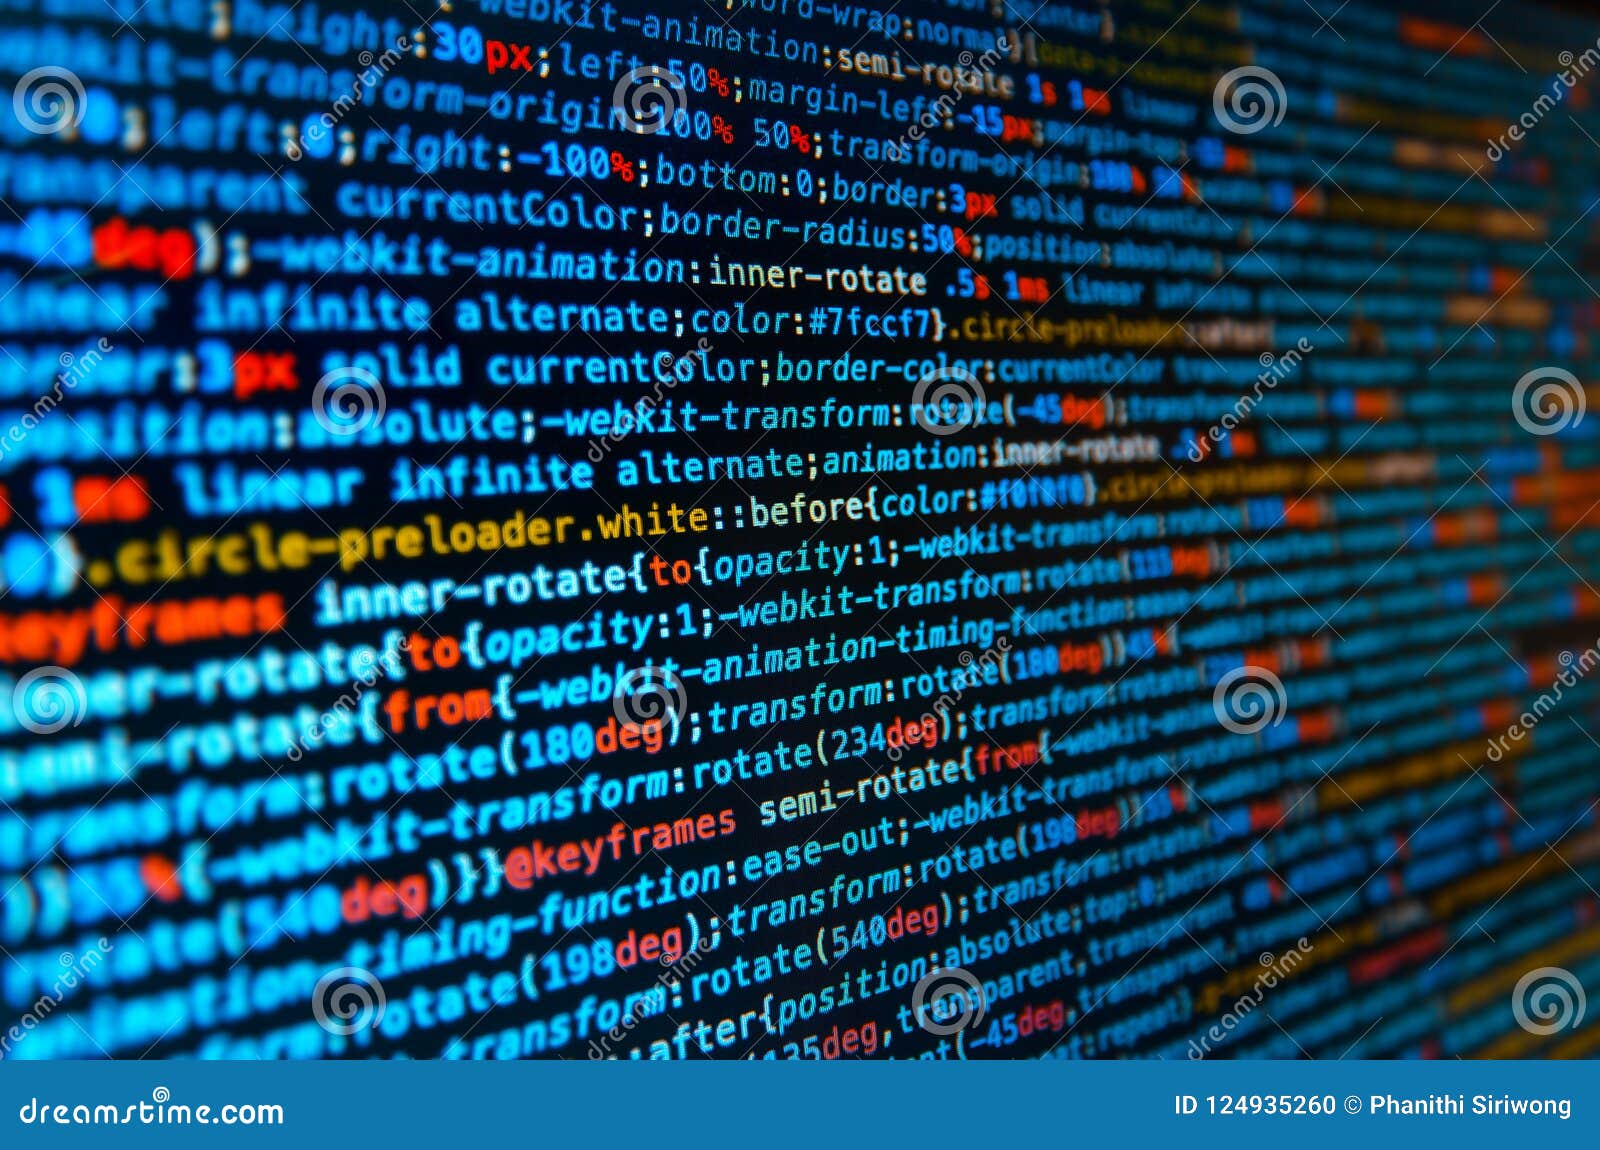 Desktop Source Code and Wallpaper by Computer Language with Coding and  Programming. Stock Photo - Image of blue, digital: 124935260